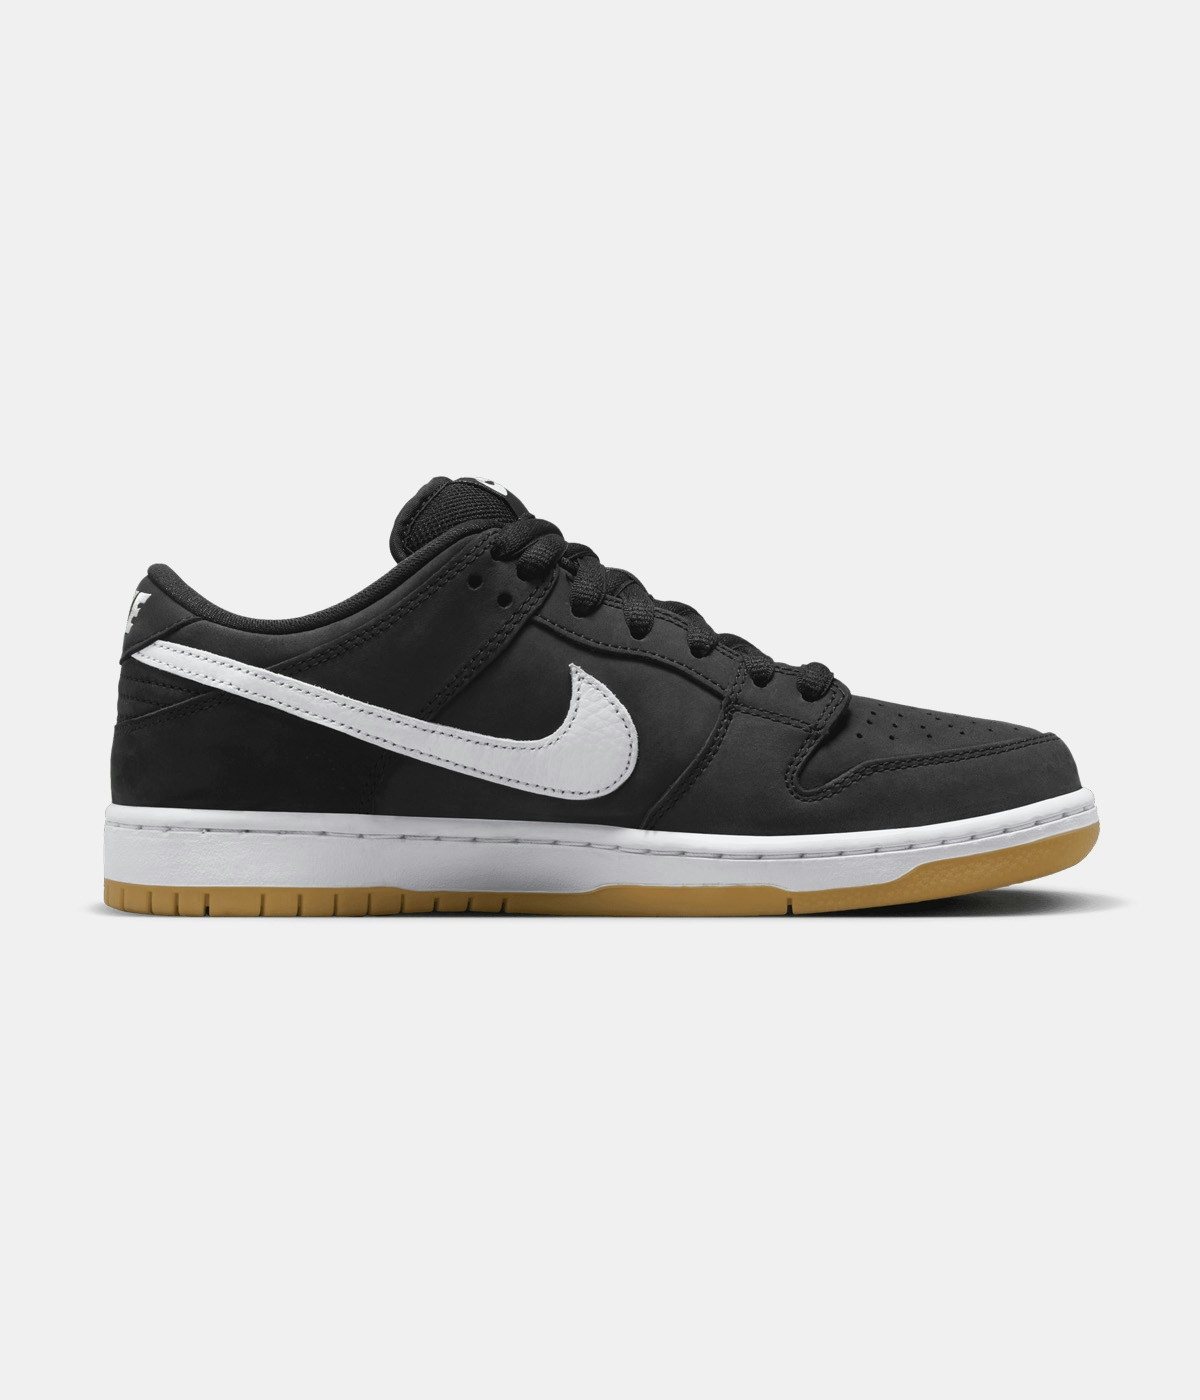 Vintage & Second Hand Nike SB - Dunk Low Pro Sneakers Black/White 2